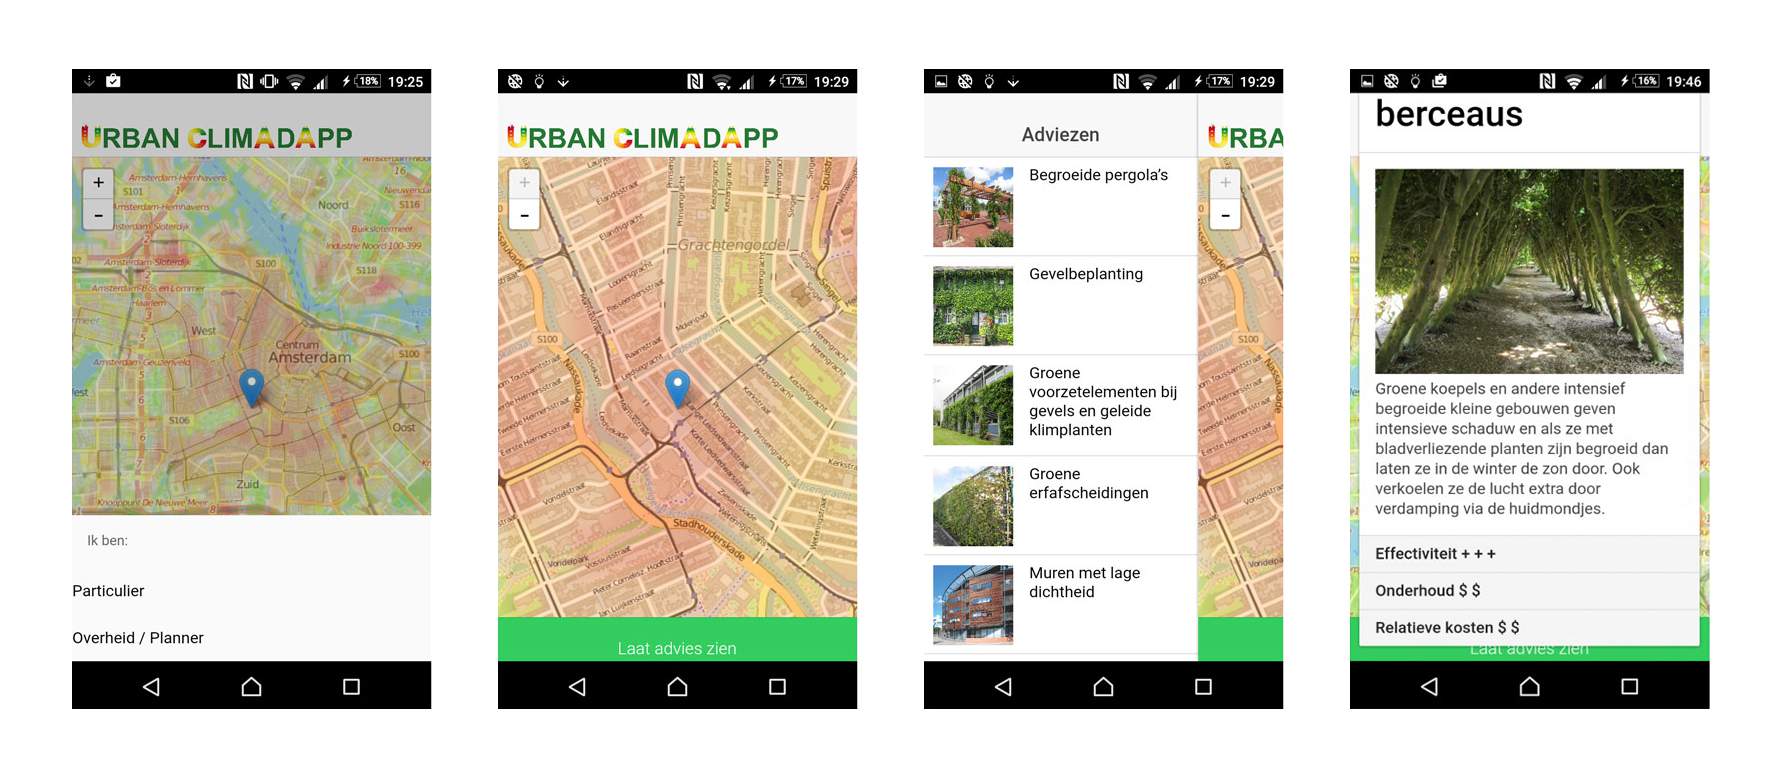 LANDLAB and WUR for AMS - app view